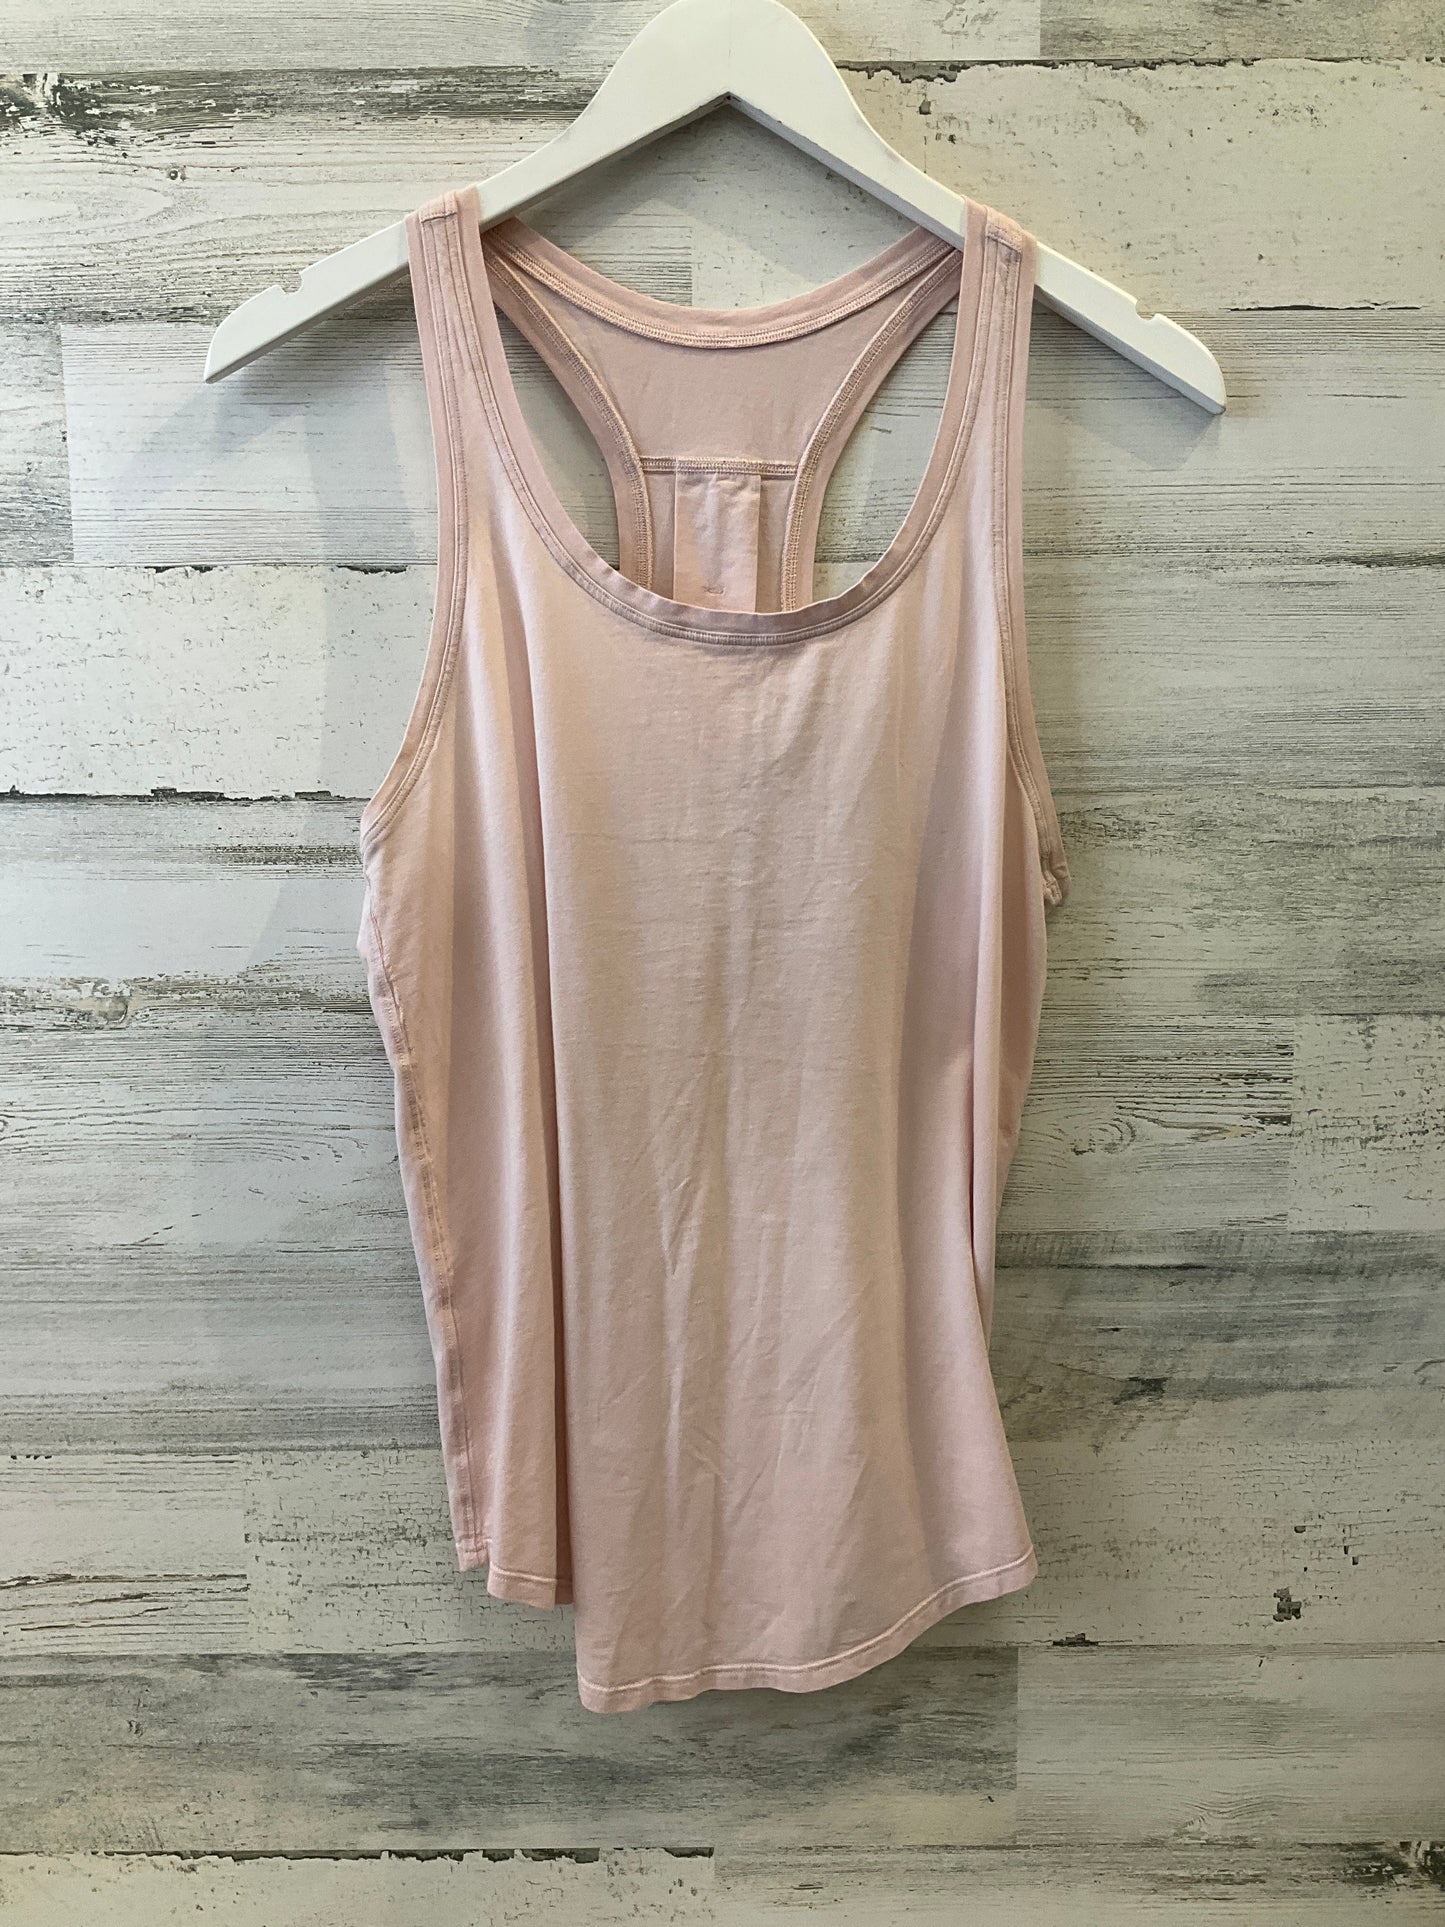 Athletic Tank Top By Lululemon  Size: Large